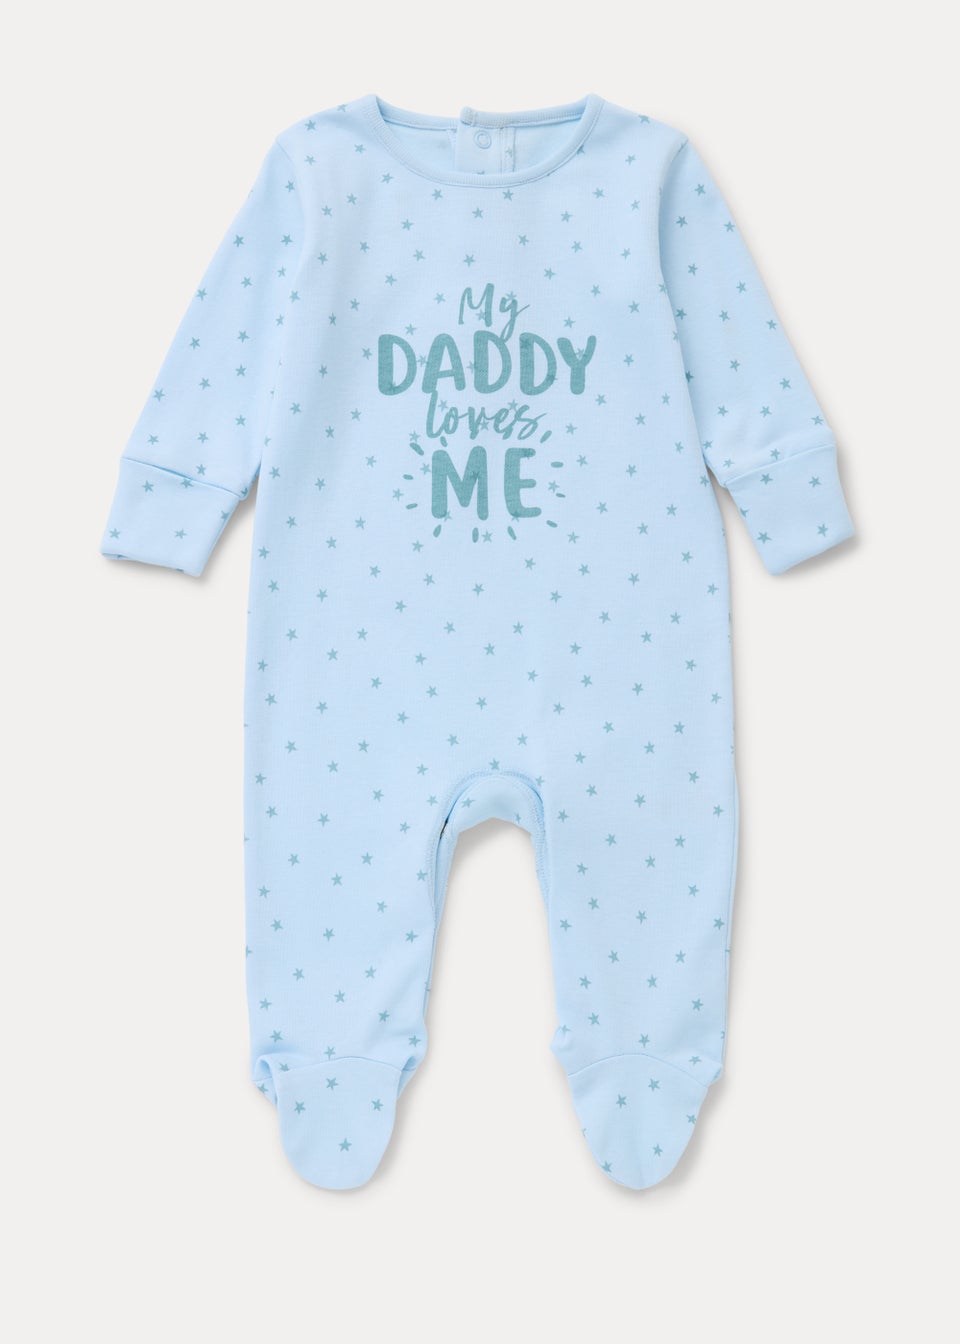 Baby Blue Daddy Loves Me Sleepsuit (Tiny Baby-18mths)